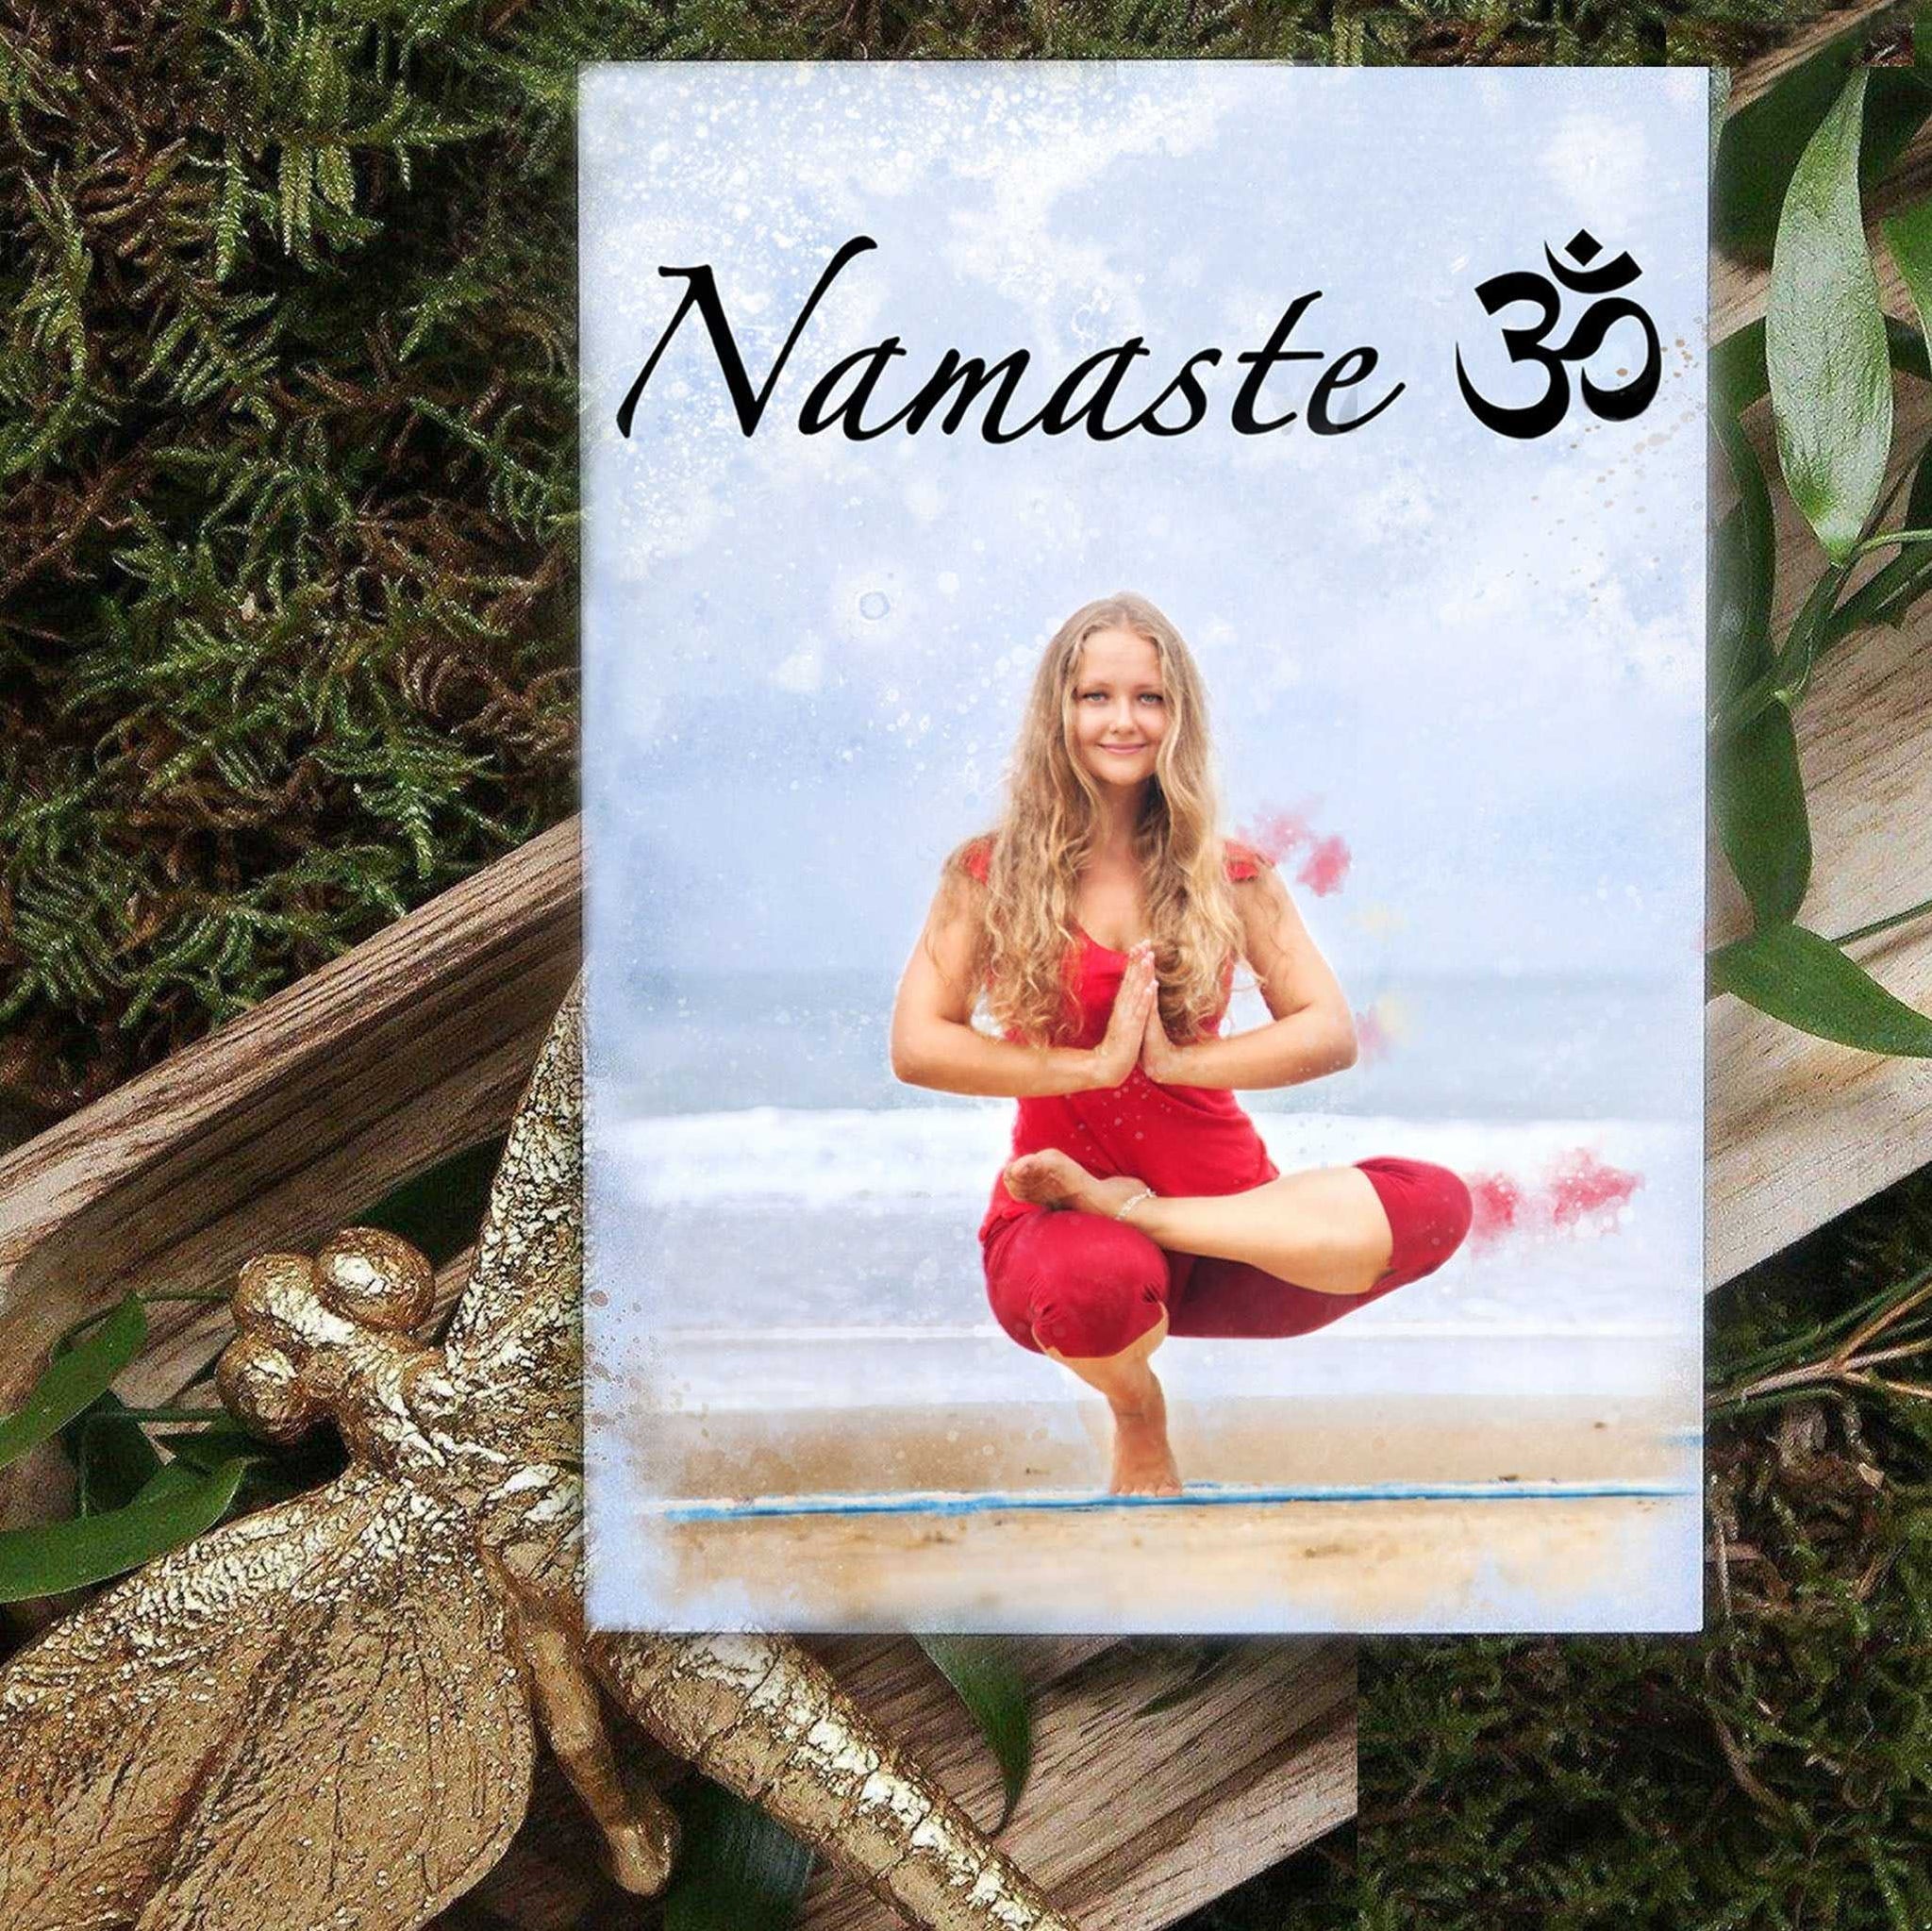 Gifts for Yoga Lovers | Gifts Yoga Teacher | Gift for Yoga Instructor | Yoga Present Ideas - FromPicToArt